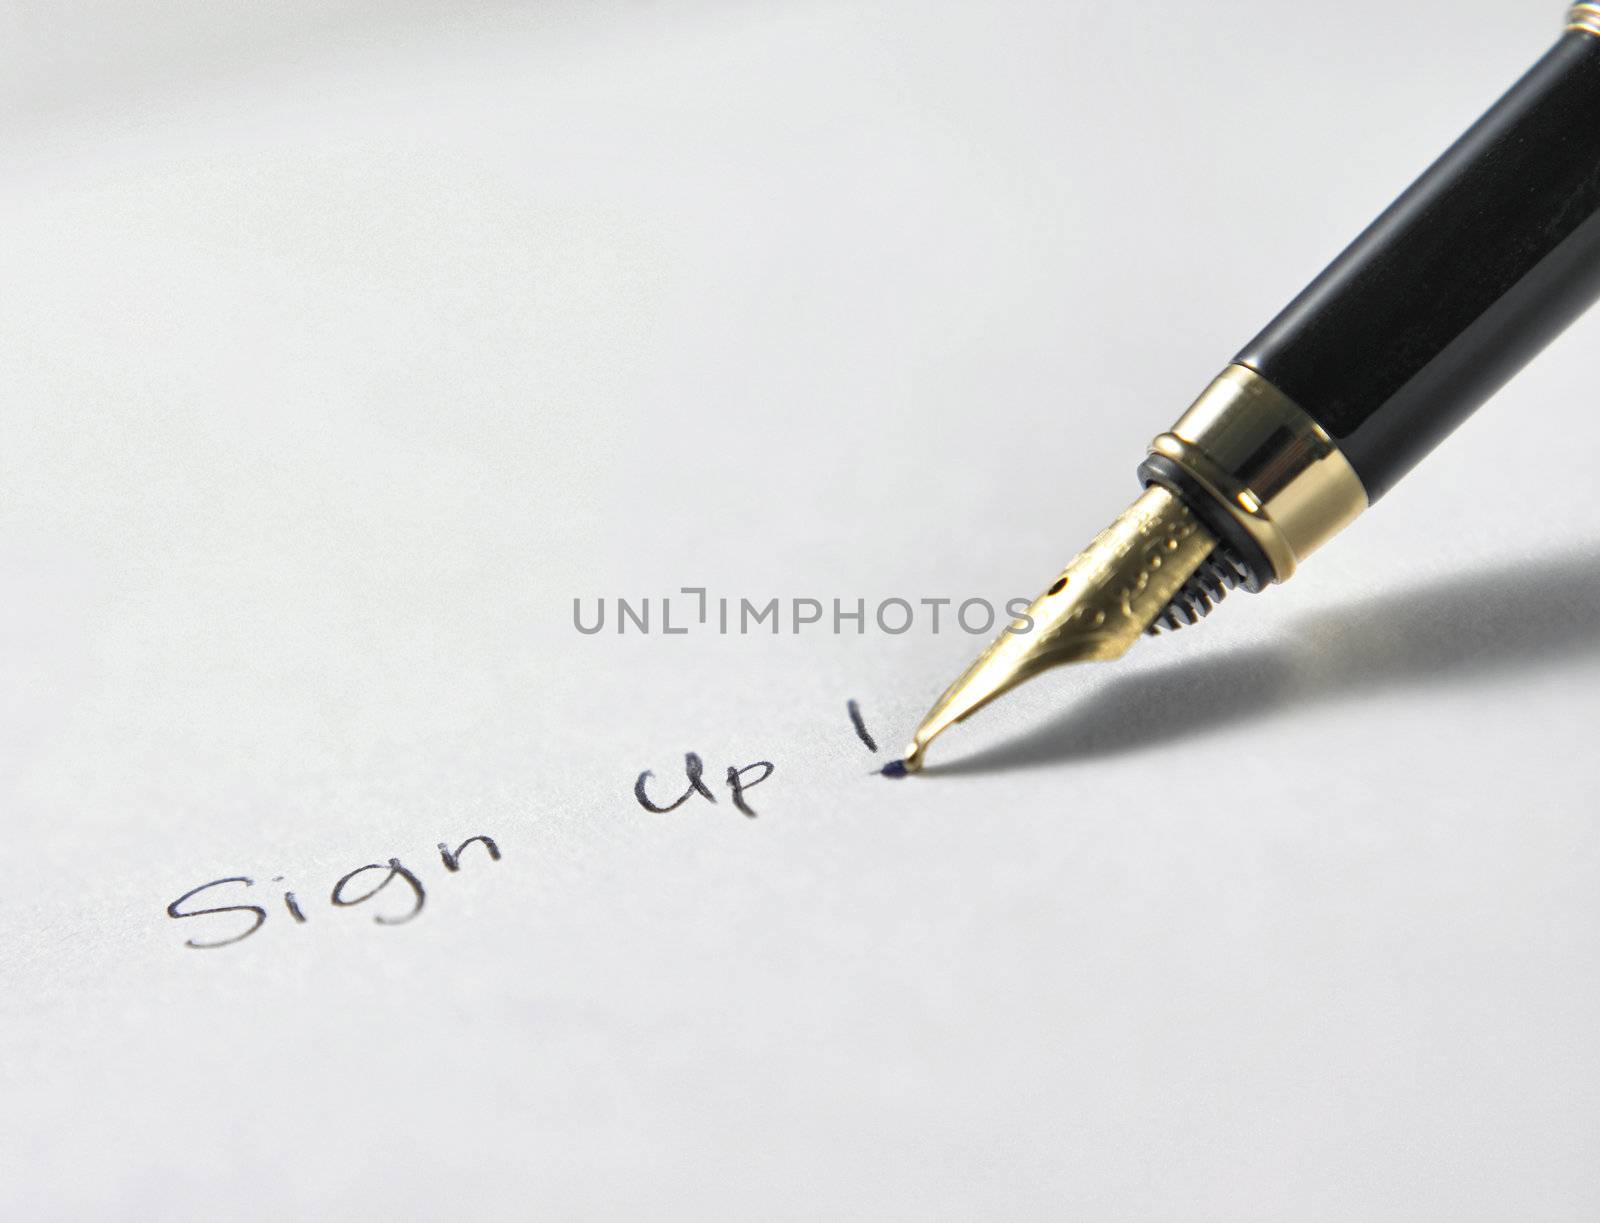 gold color pen writing the paper with text sign up